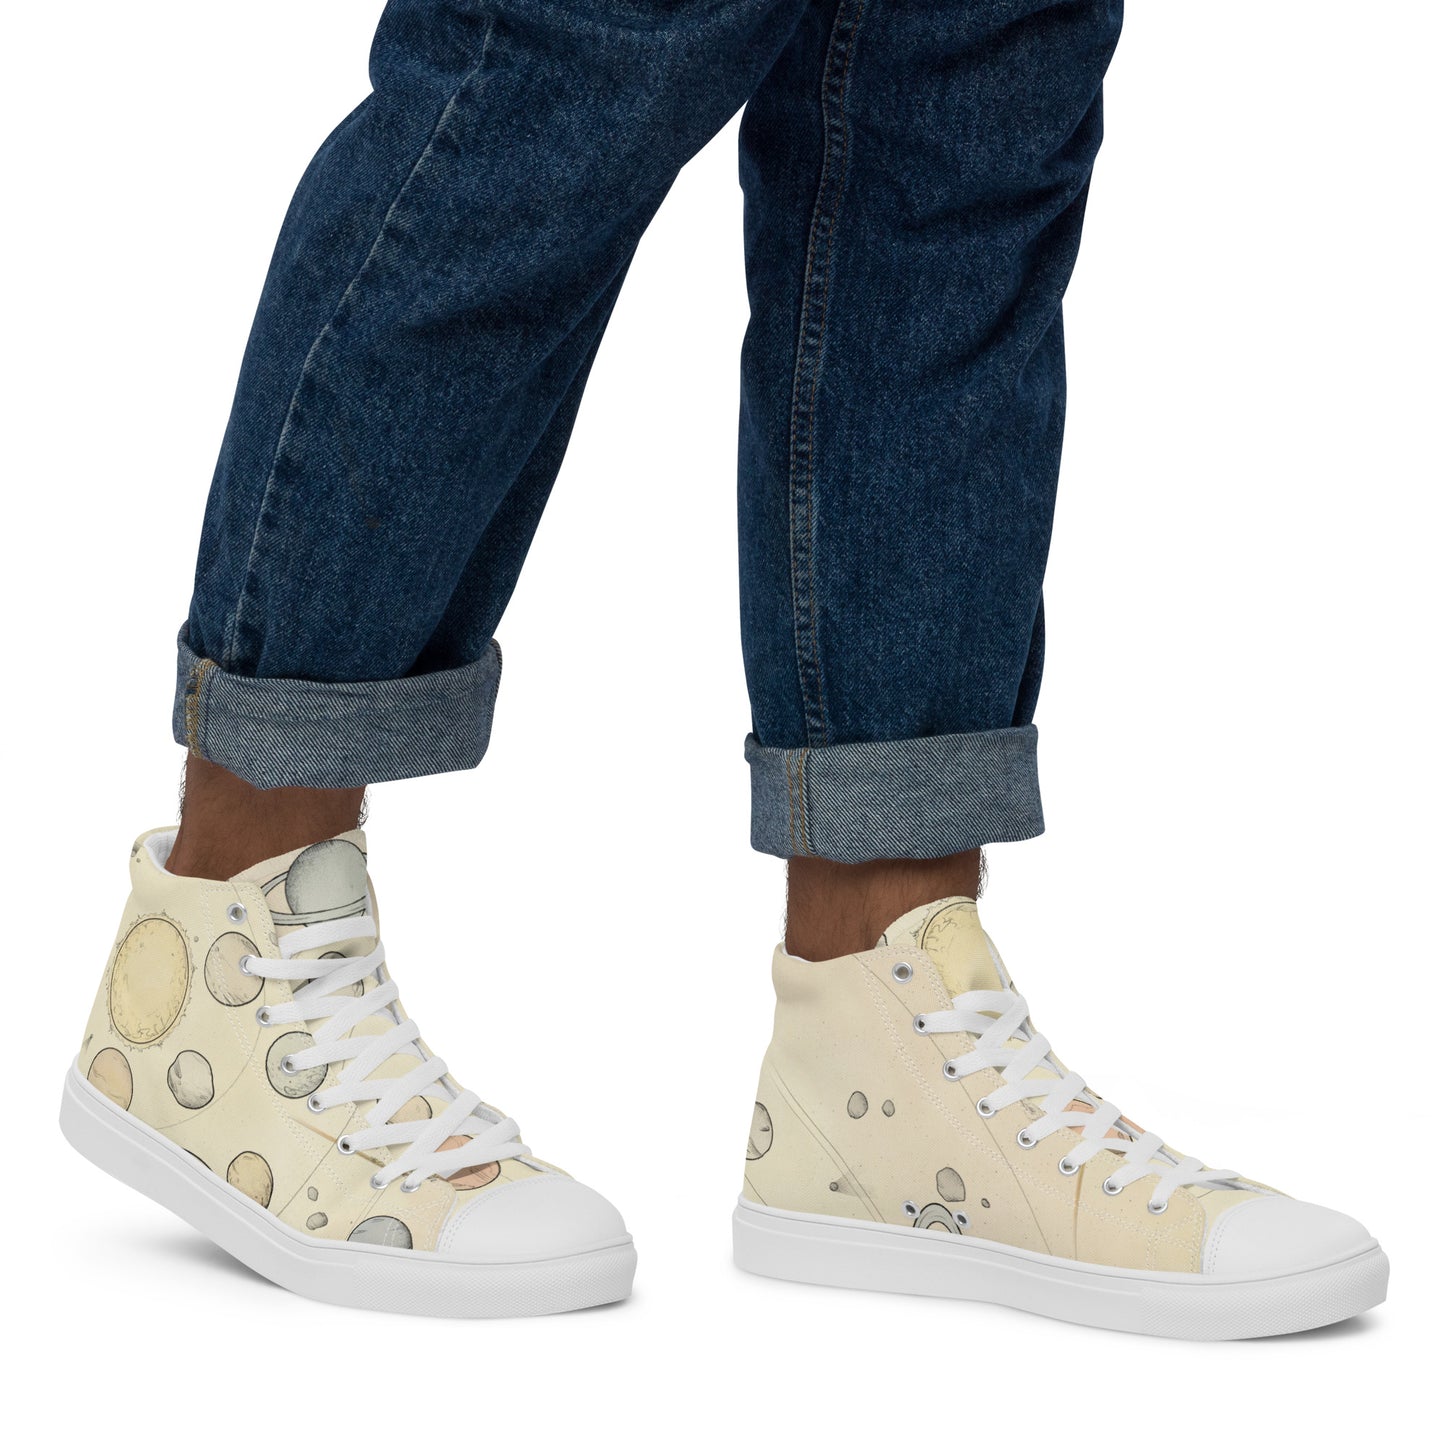 Stegegets Men's High Top Canvas Shoes - Both shoes being worn